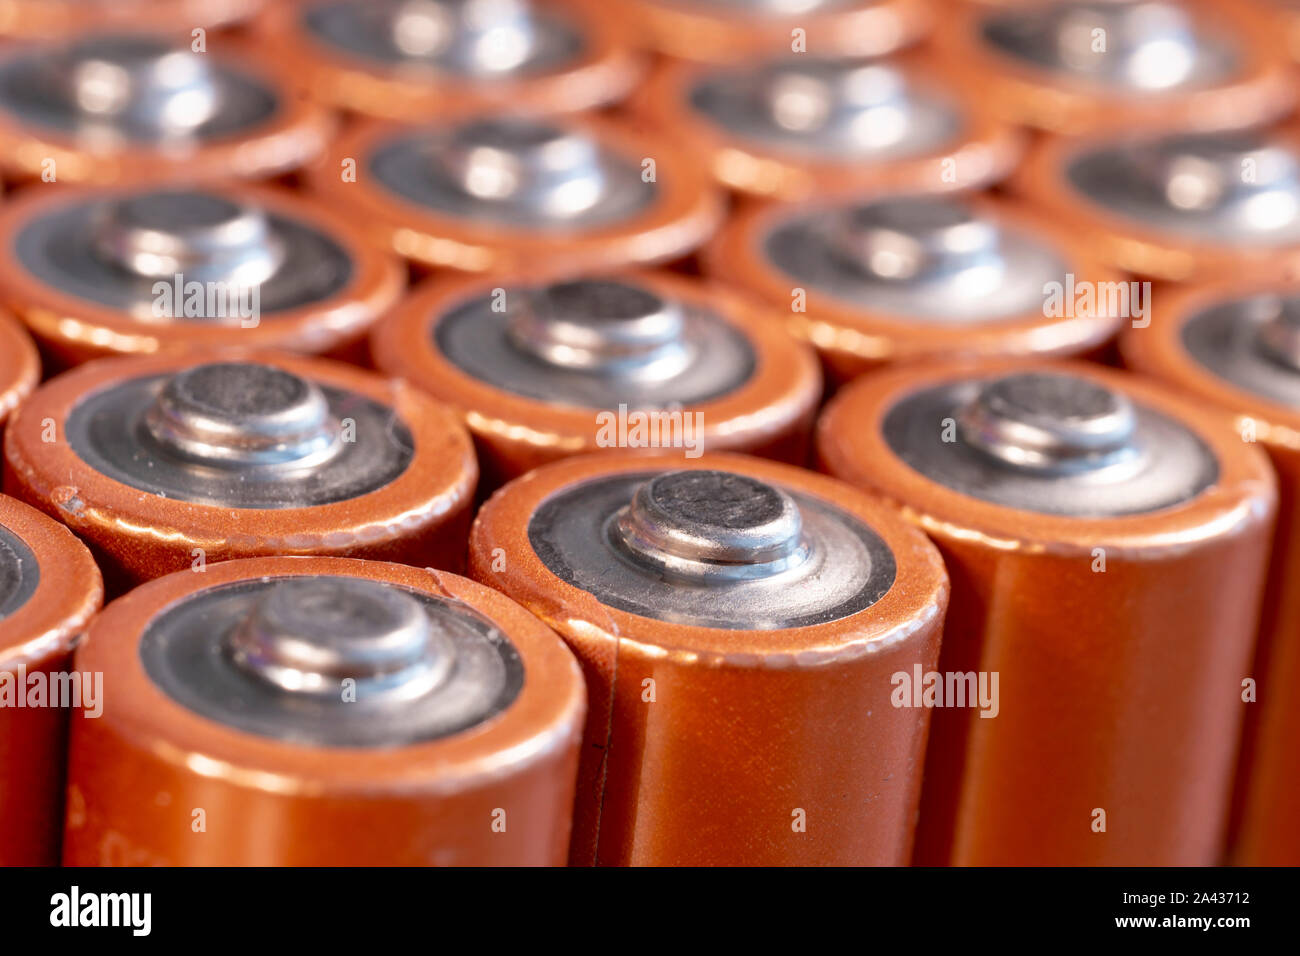 Closeup at pile of Duracell AA alkaline batteries Stock Photo - Alamy